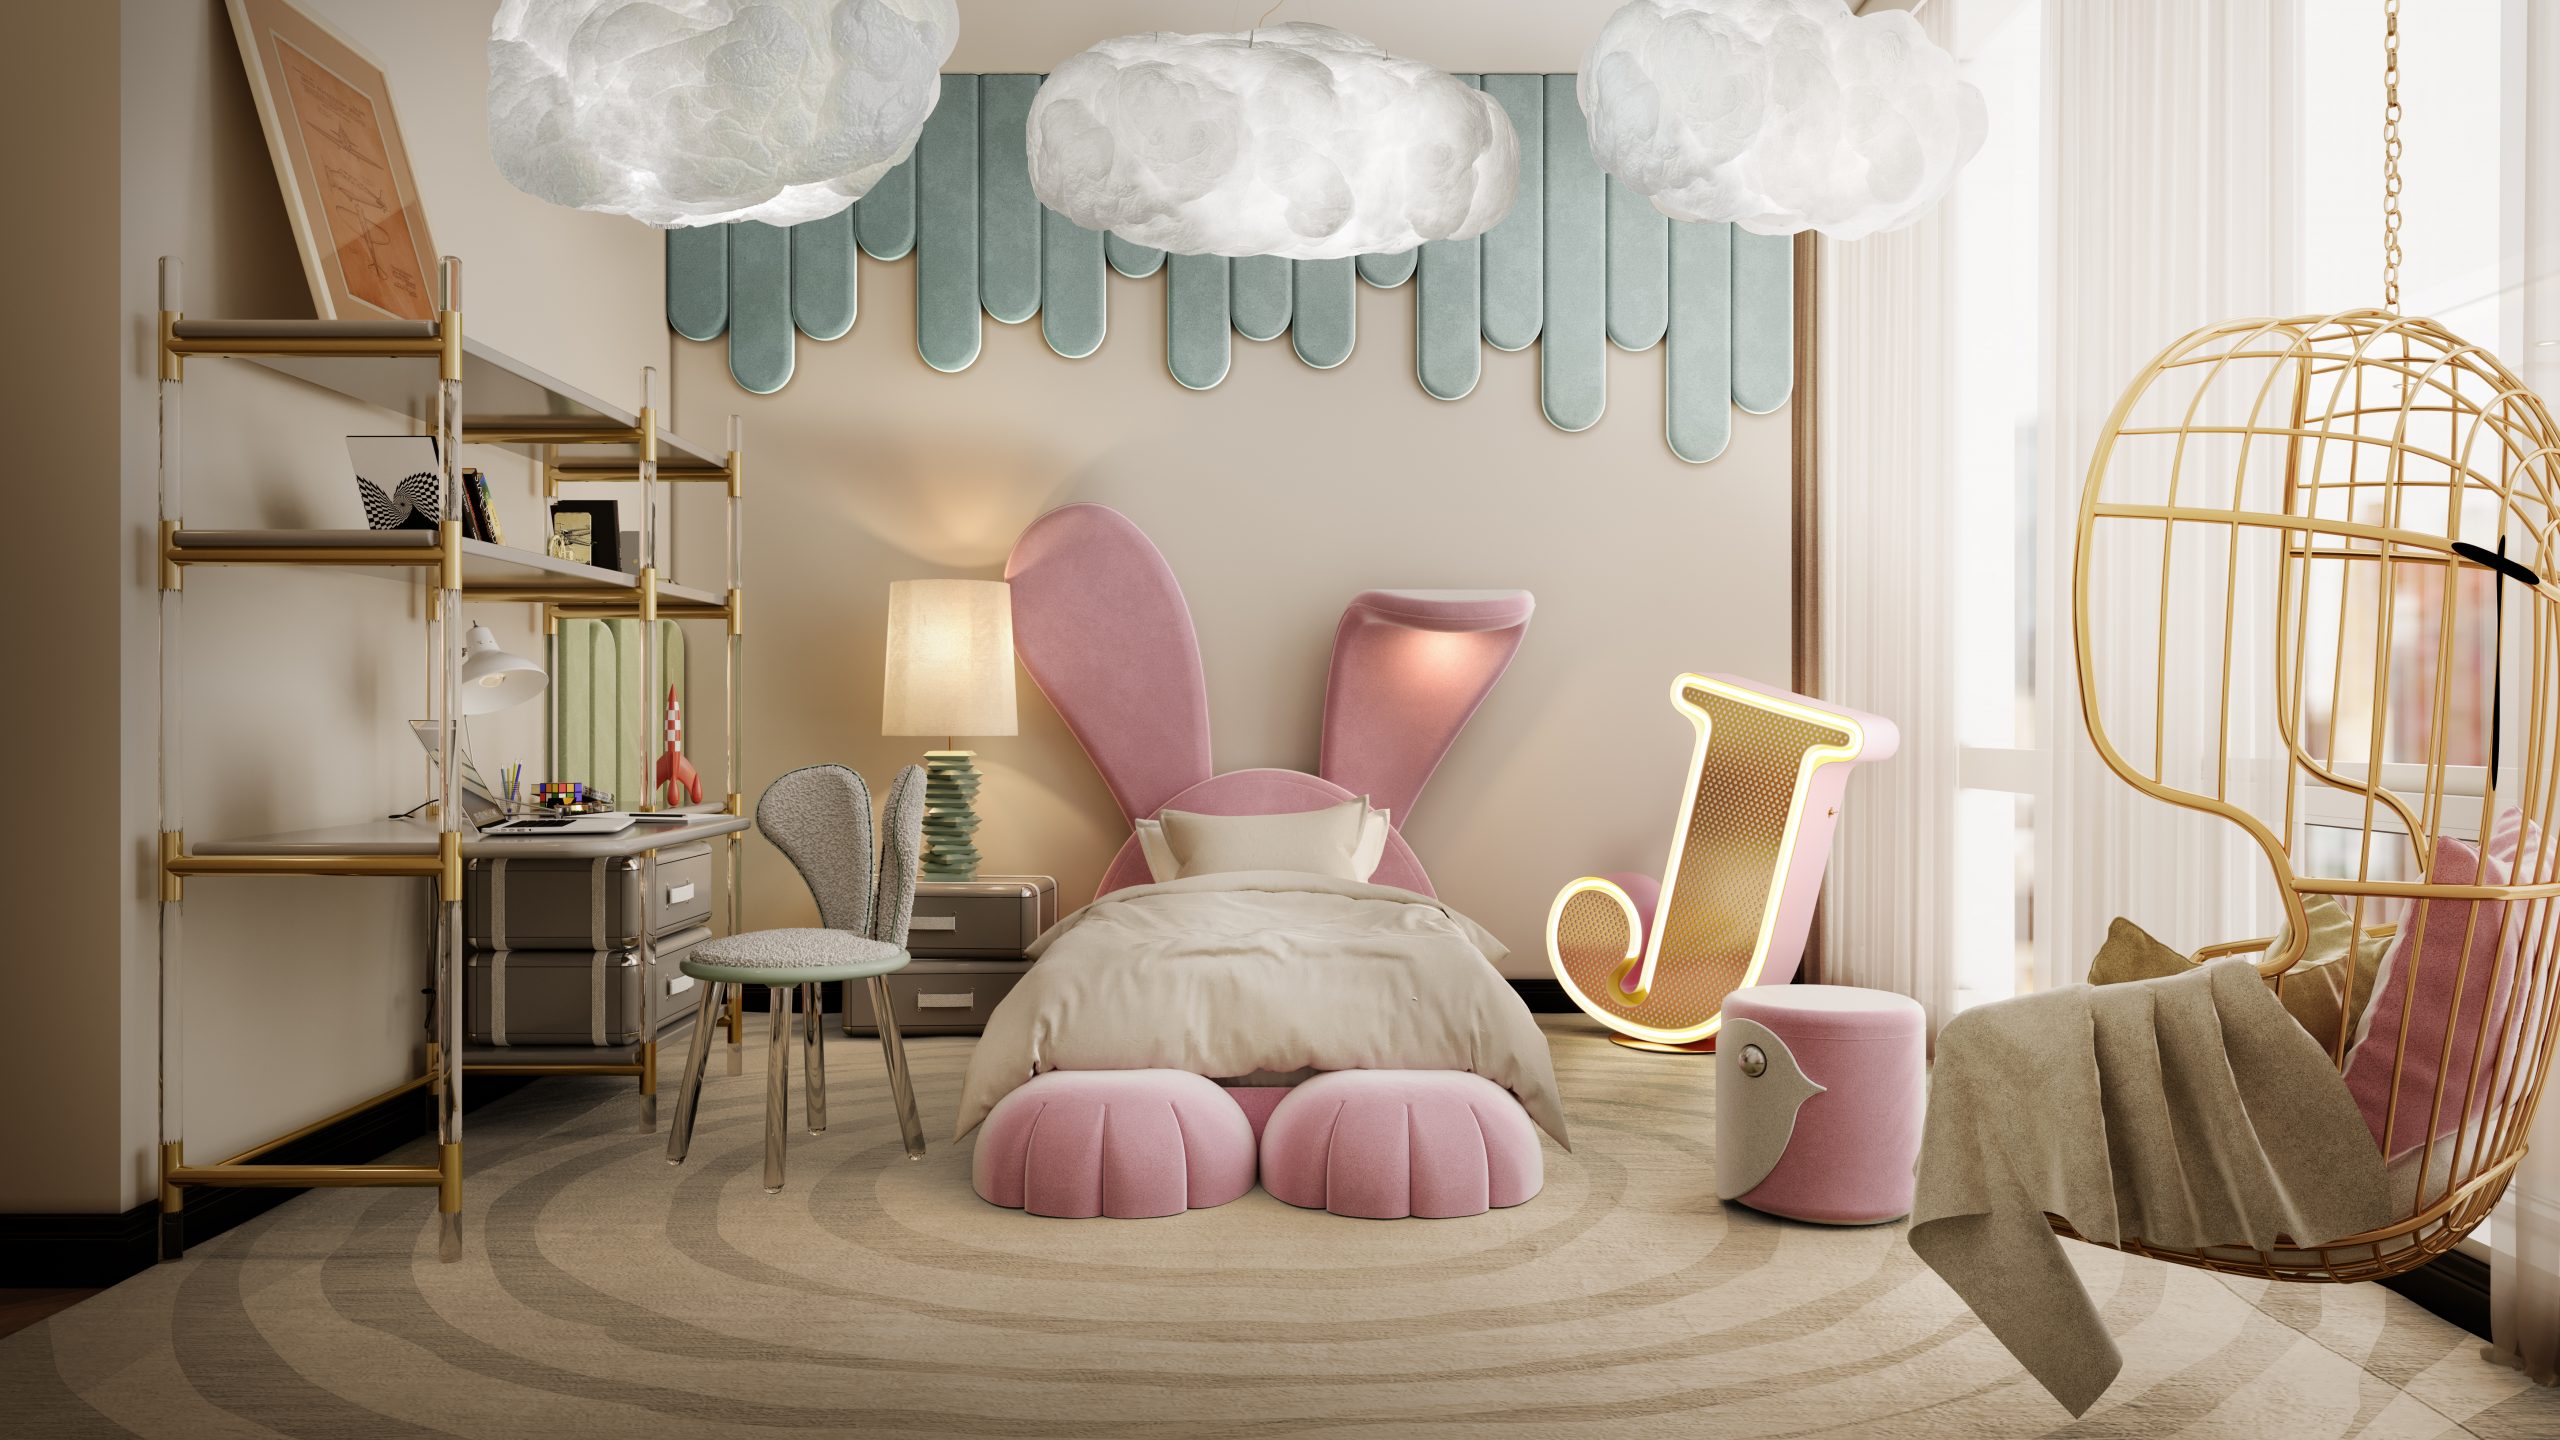 Modernize and upgrade your bedroom decoration